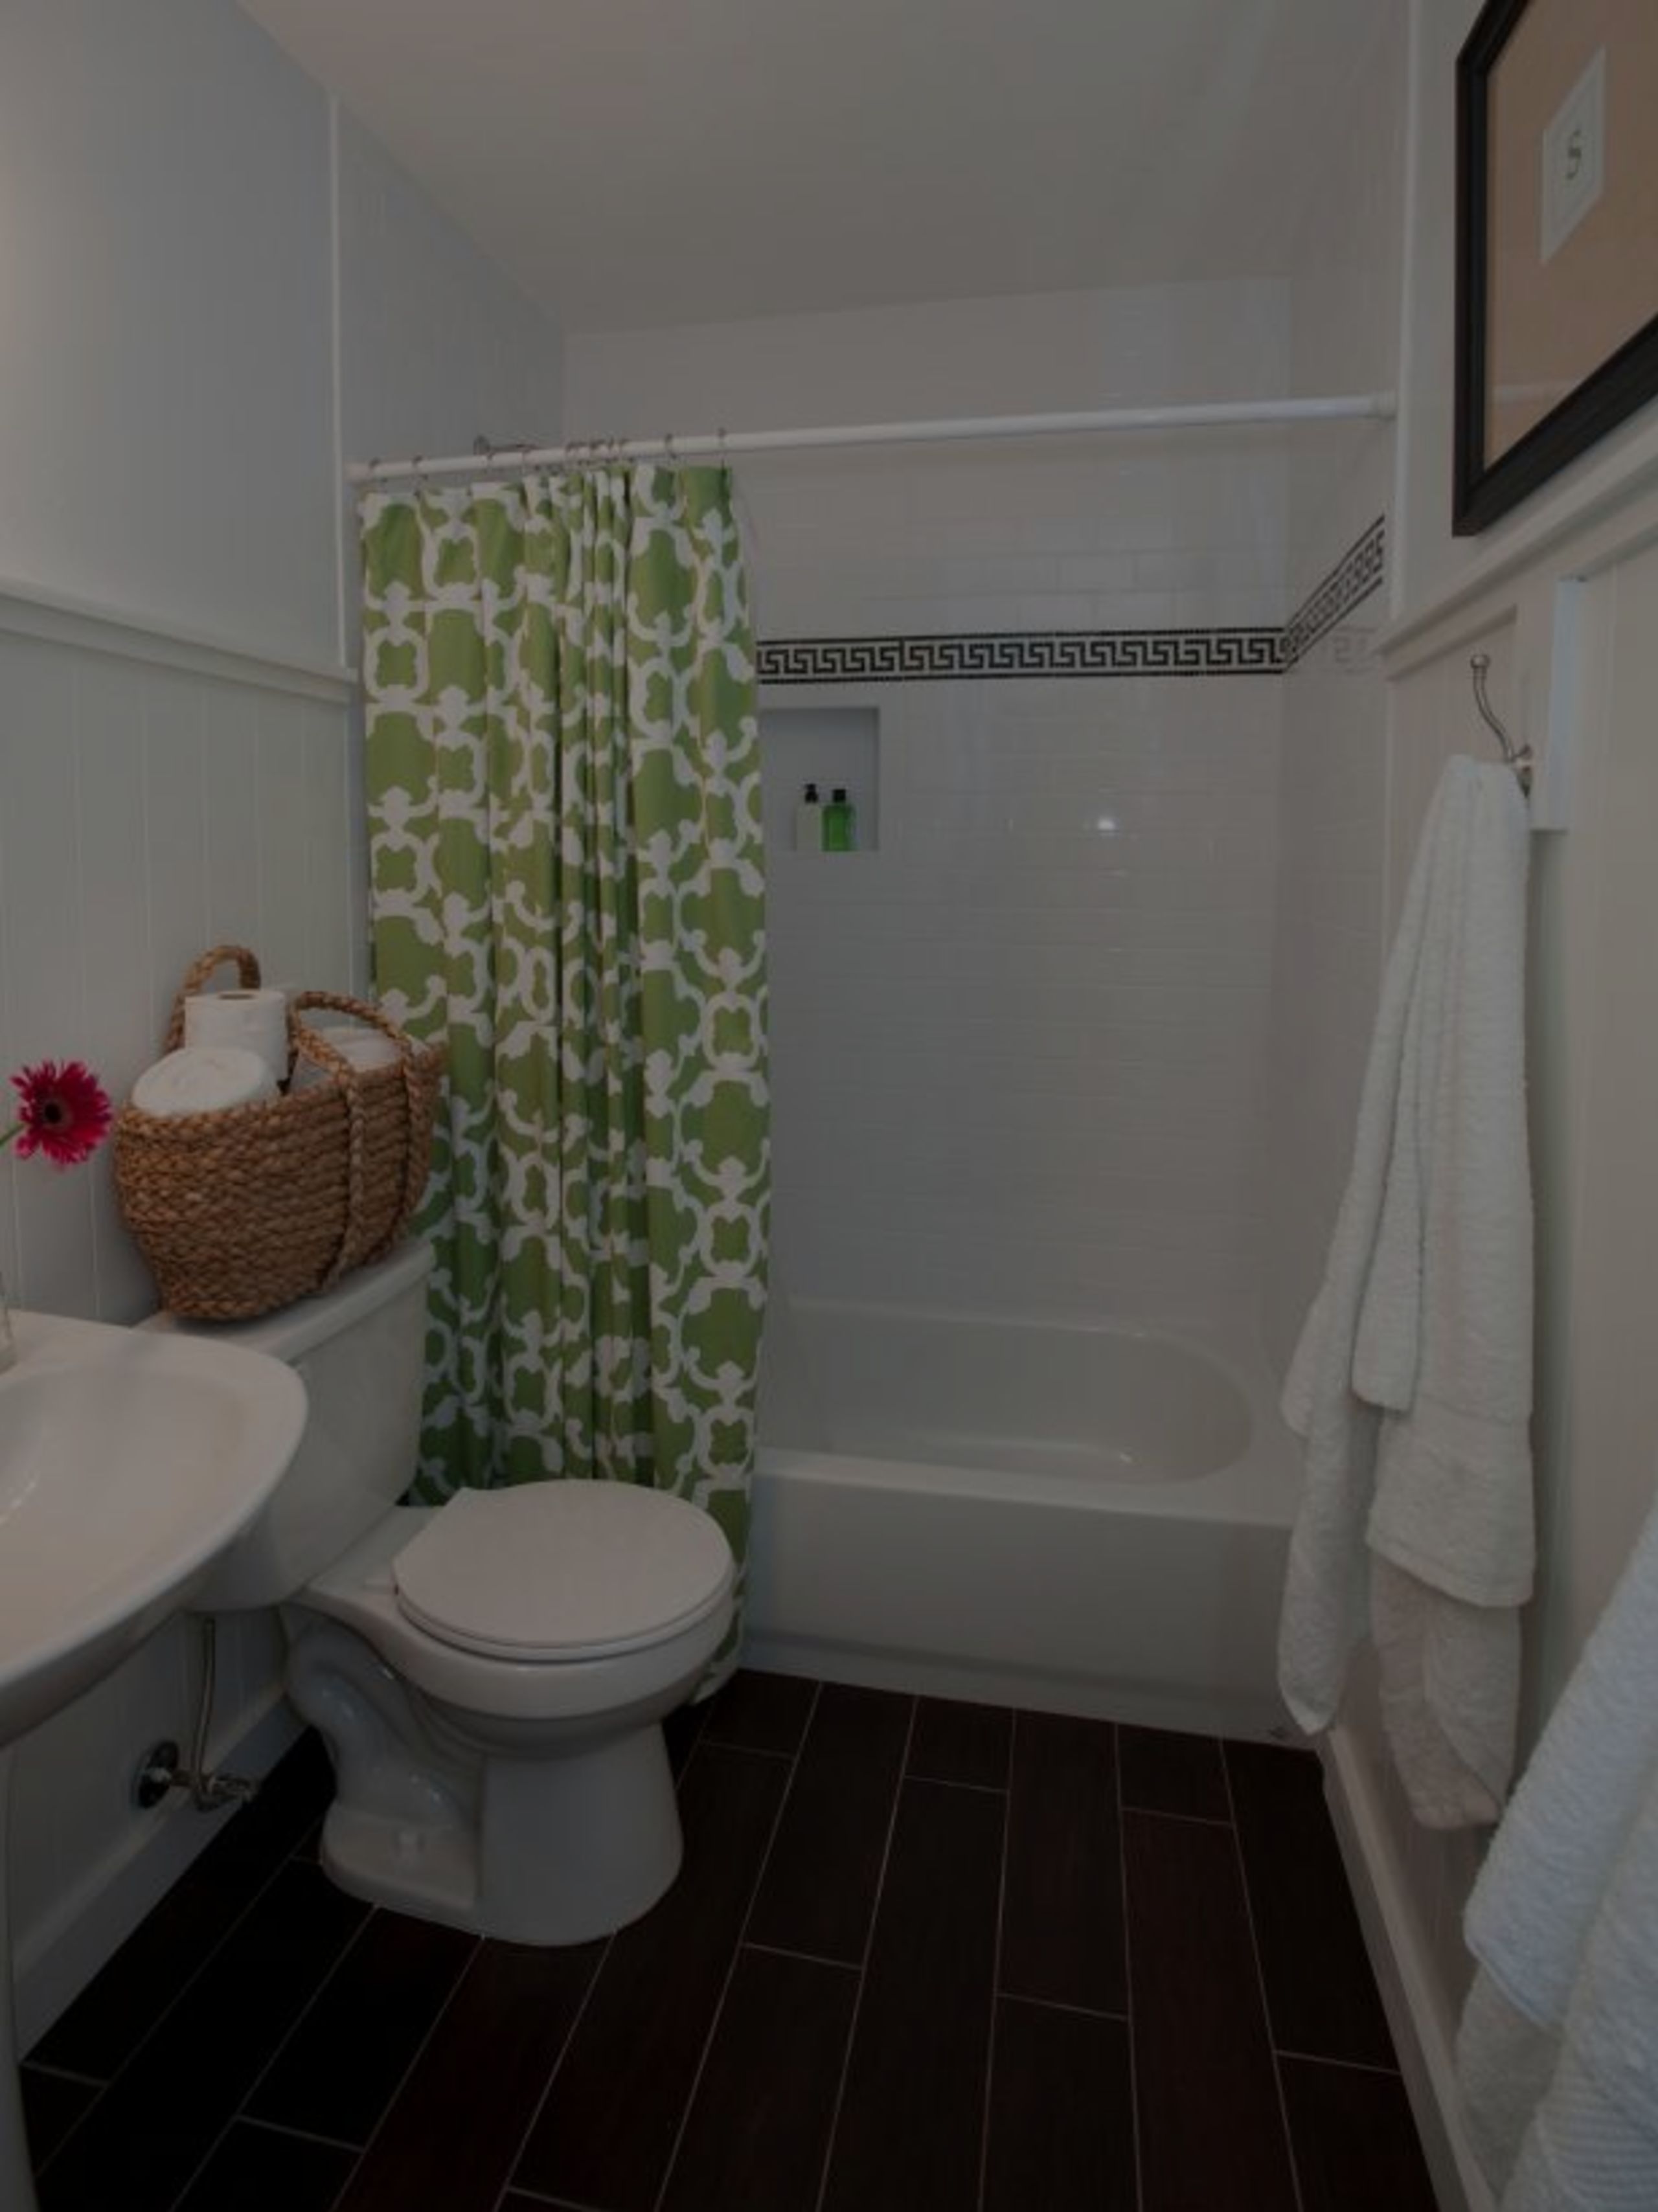 Ideas to Make a Small Bathroom Feel Larger